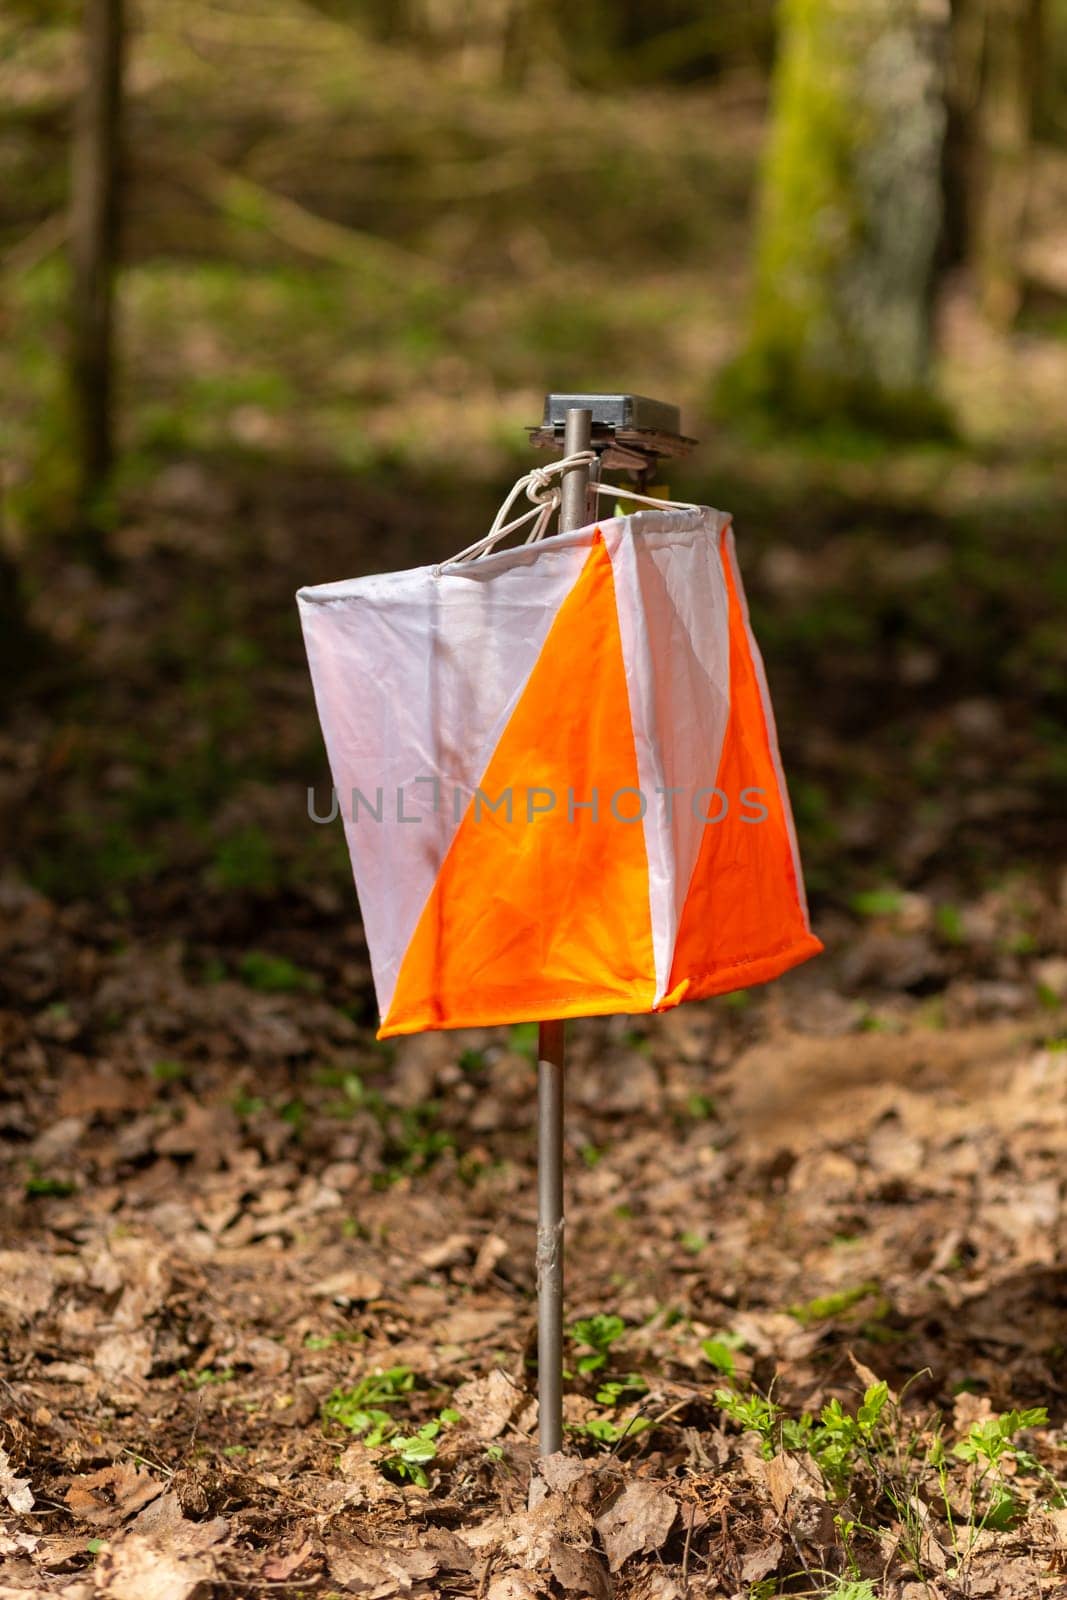 Orienteering. Control point Prism and electric composter for orienteering in the spring forest. Navigation equipment. The concept